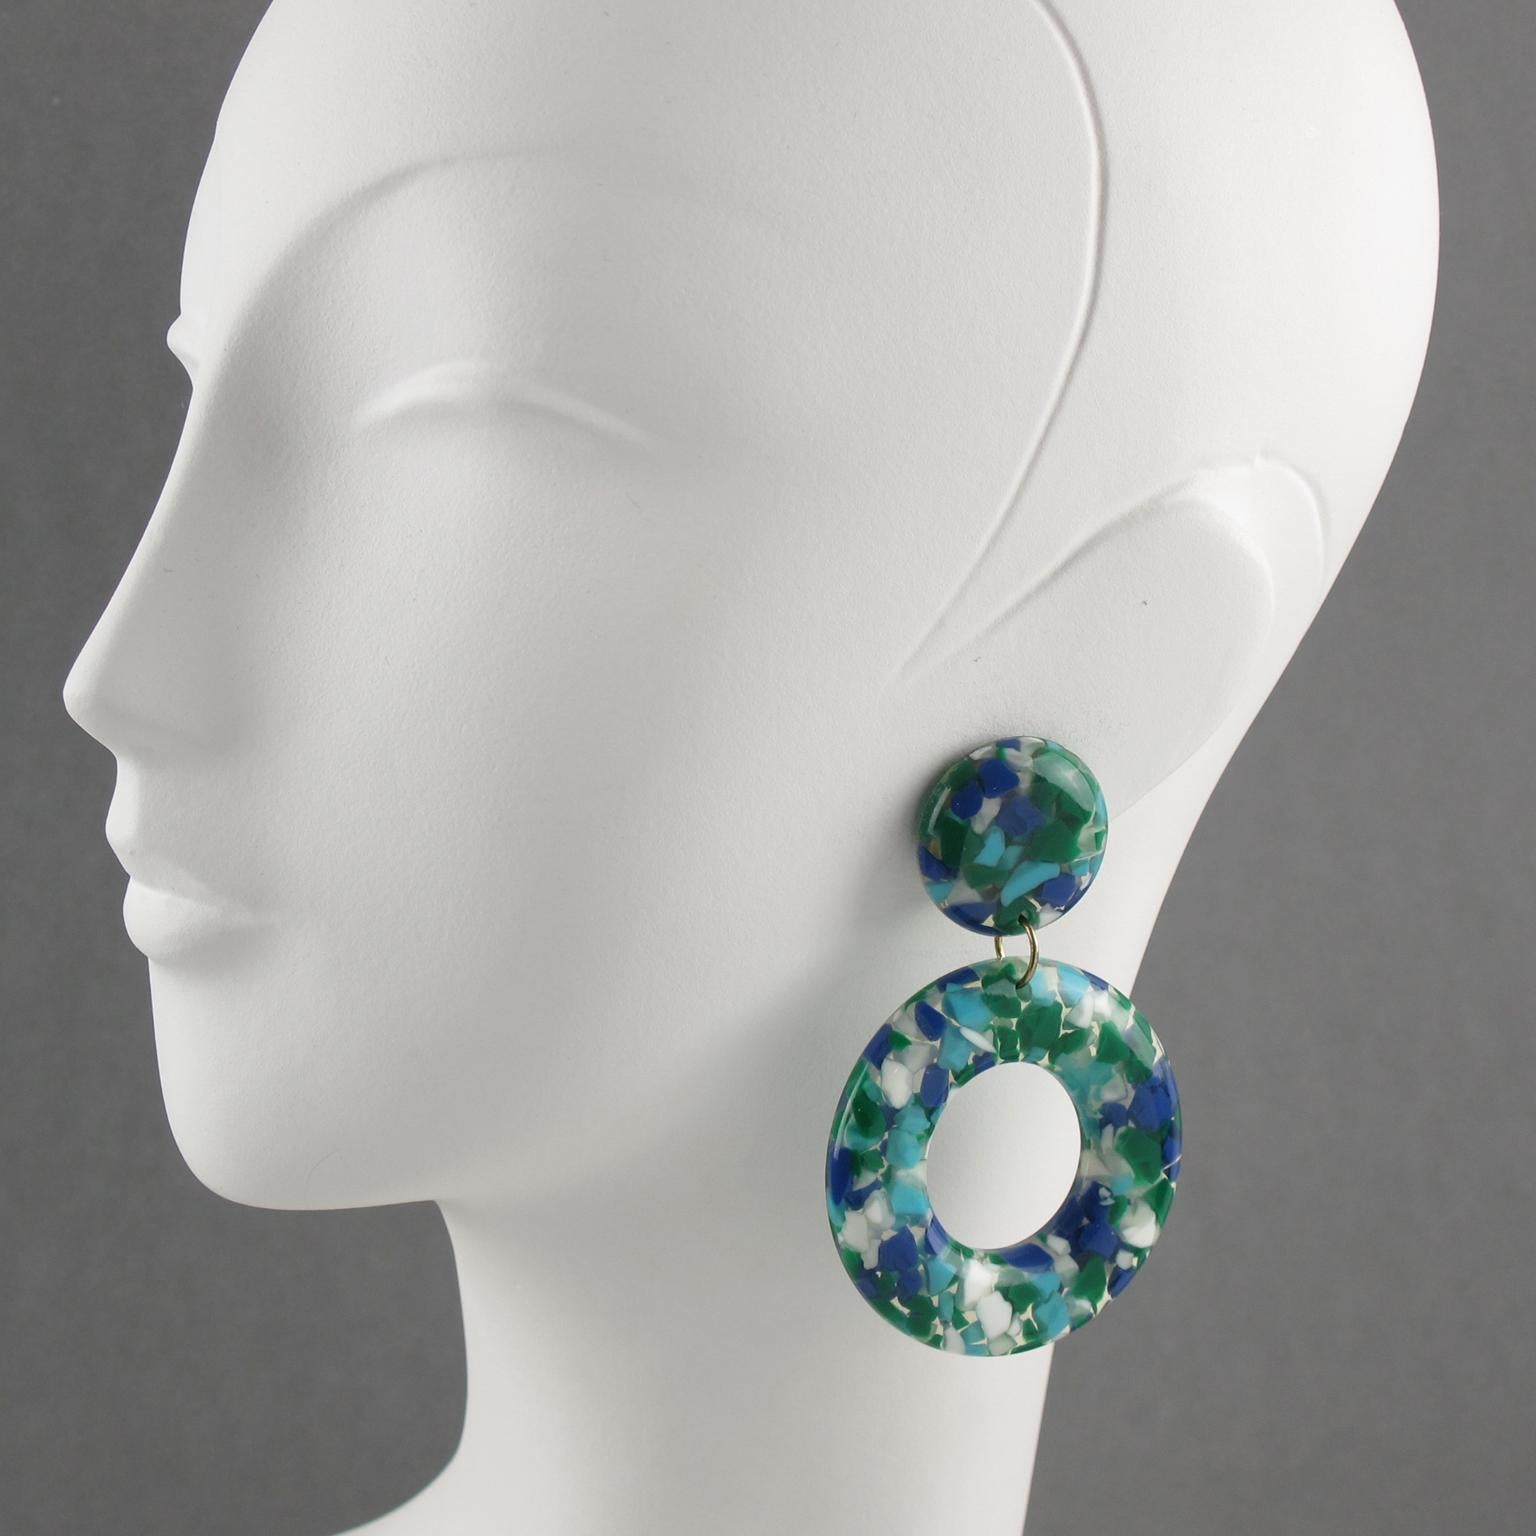 Beautiful bright colors oversized lucite clip-on earrings. Large donut dangling shape with a geometric design featuring clear lucite with colorful tiny chunk inclusions. Assorted colors of cobalt blue, emerald green, white and arctic blue. No